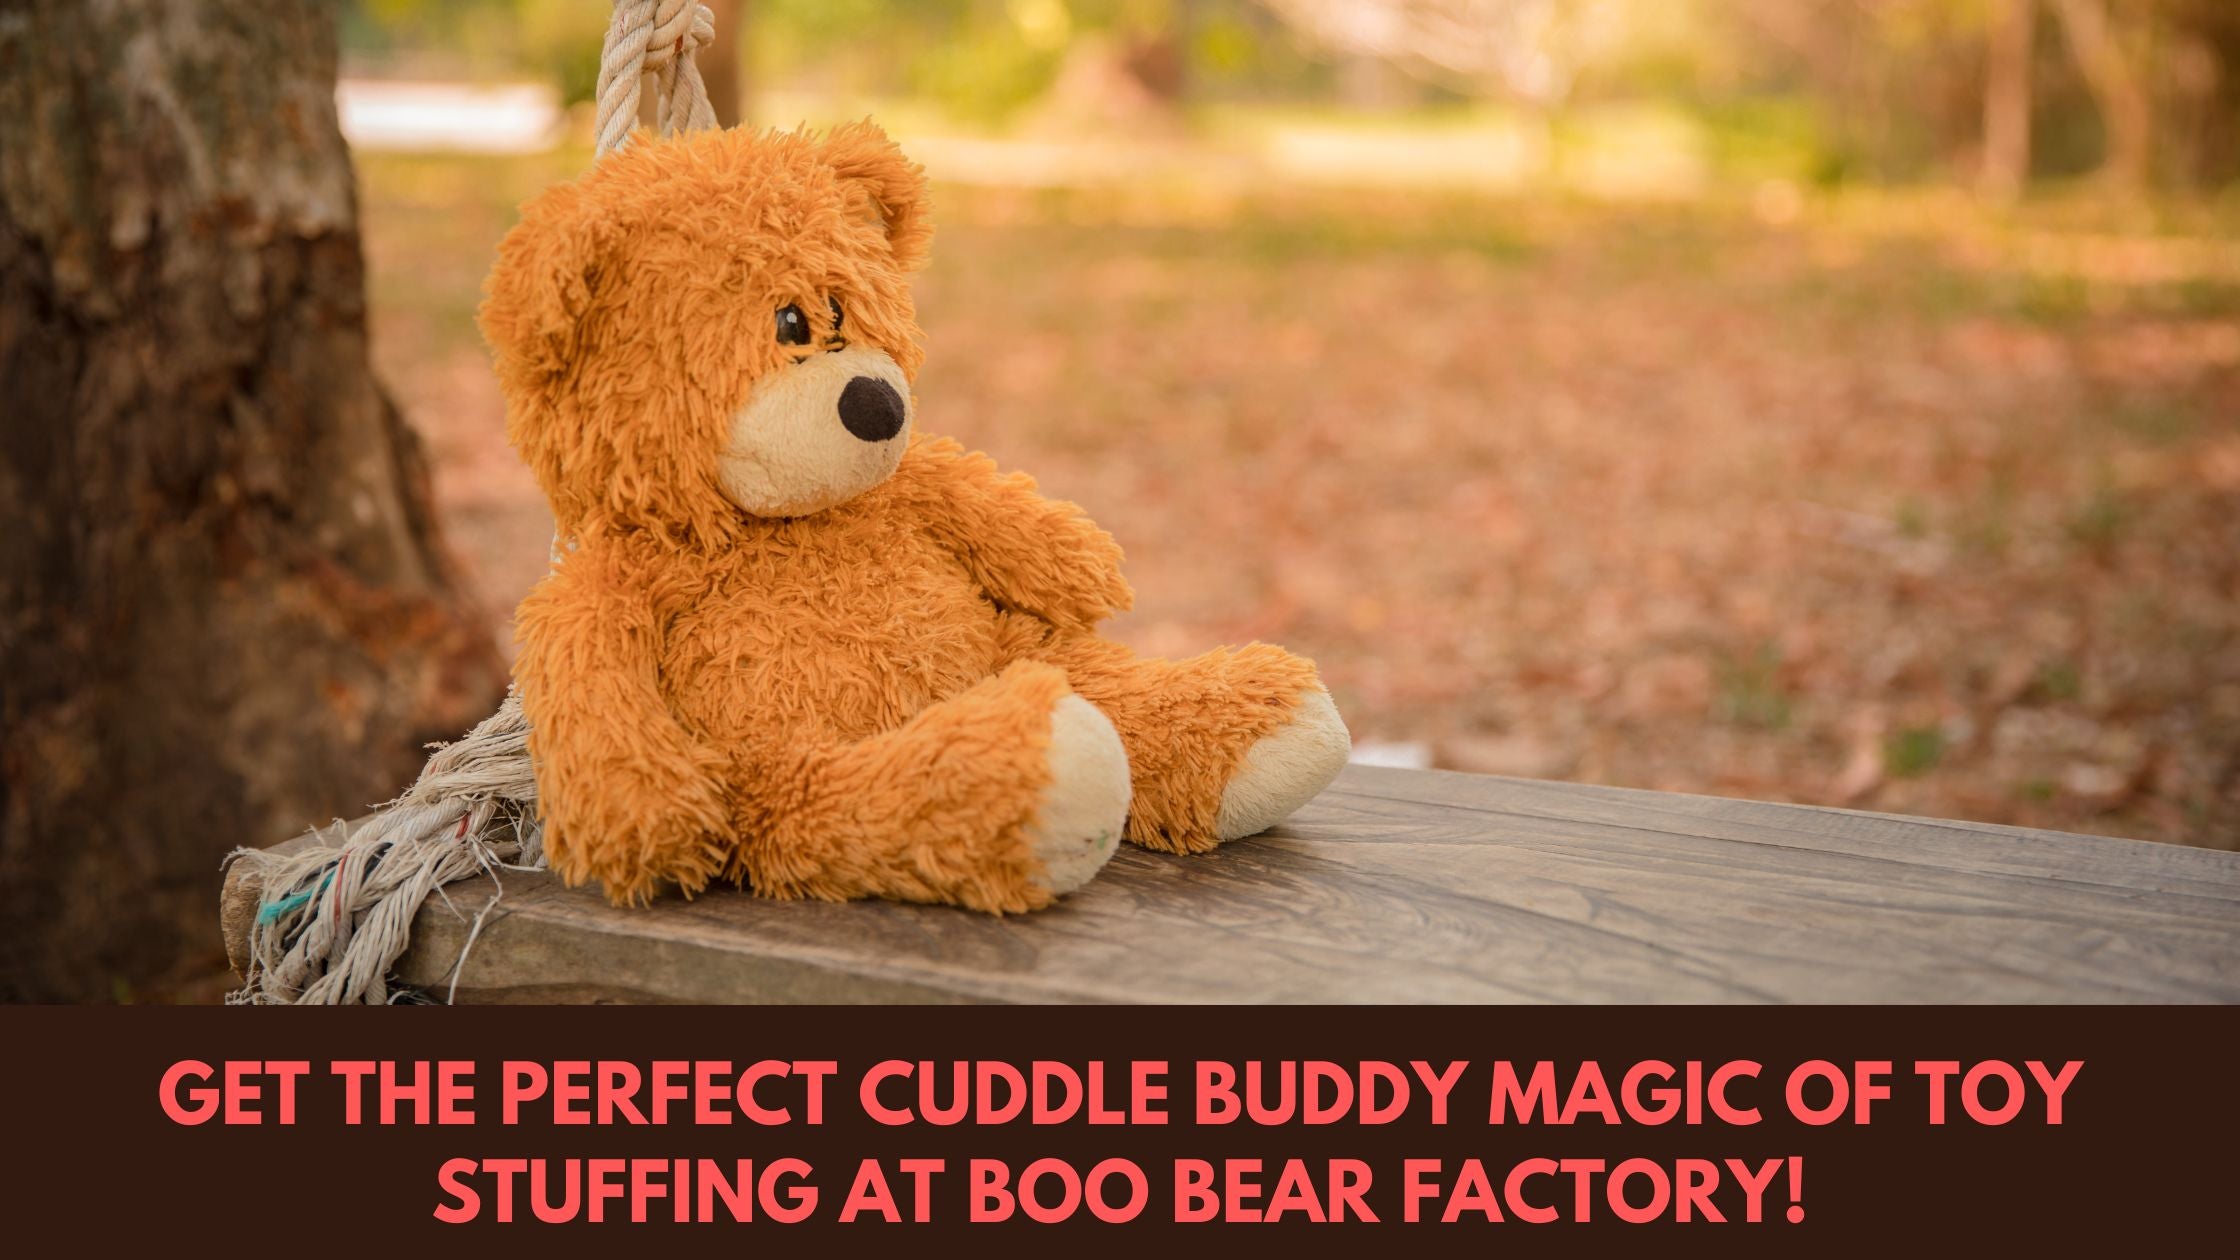 Get the Perfect Cuddle Buddy Magic of Toy Stuffing at Boo Bear Factory